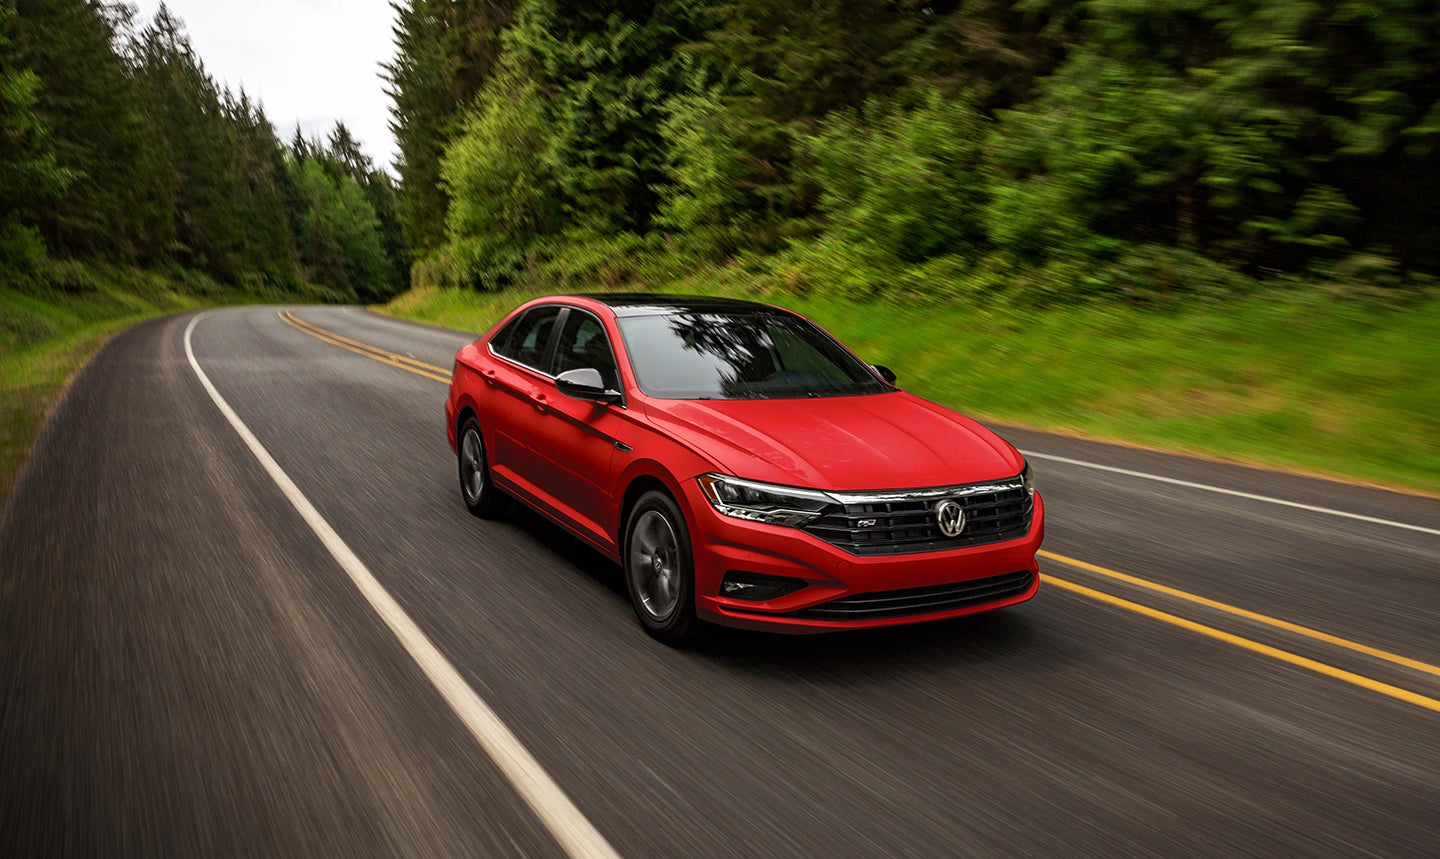 A red 2021 Volkswagen Jetta driving on a road with trees.